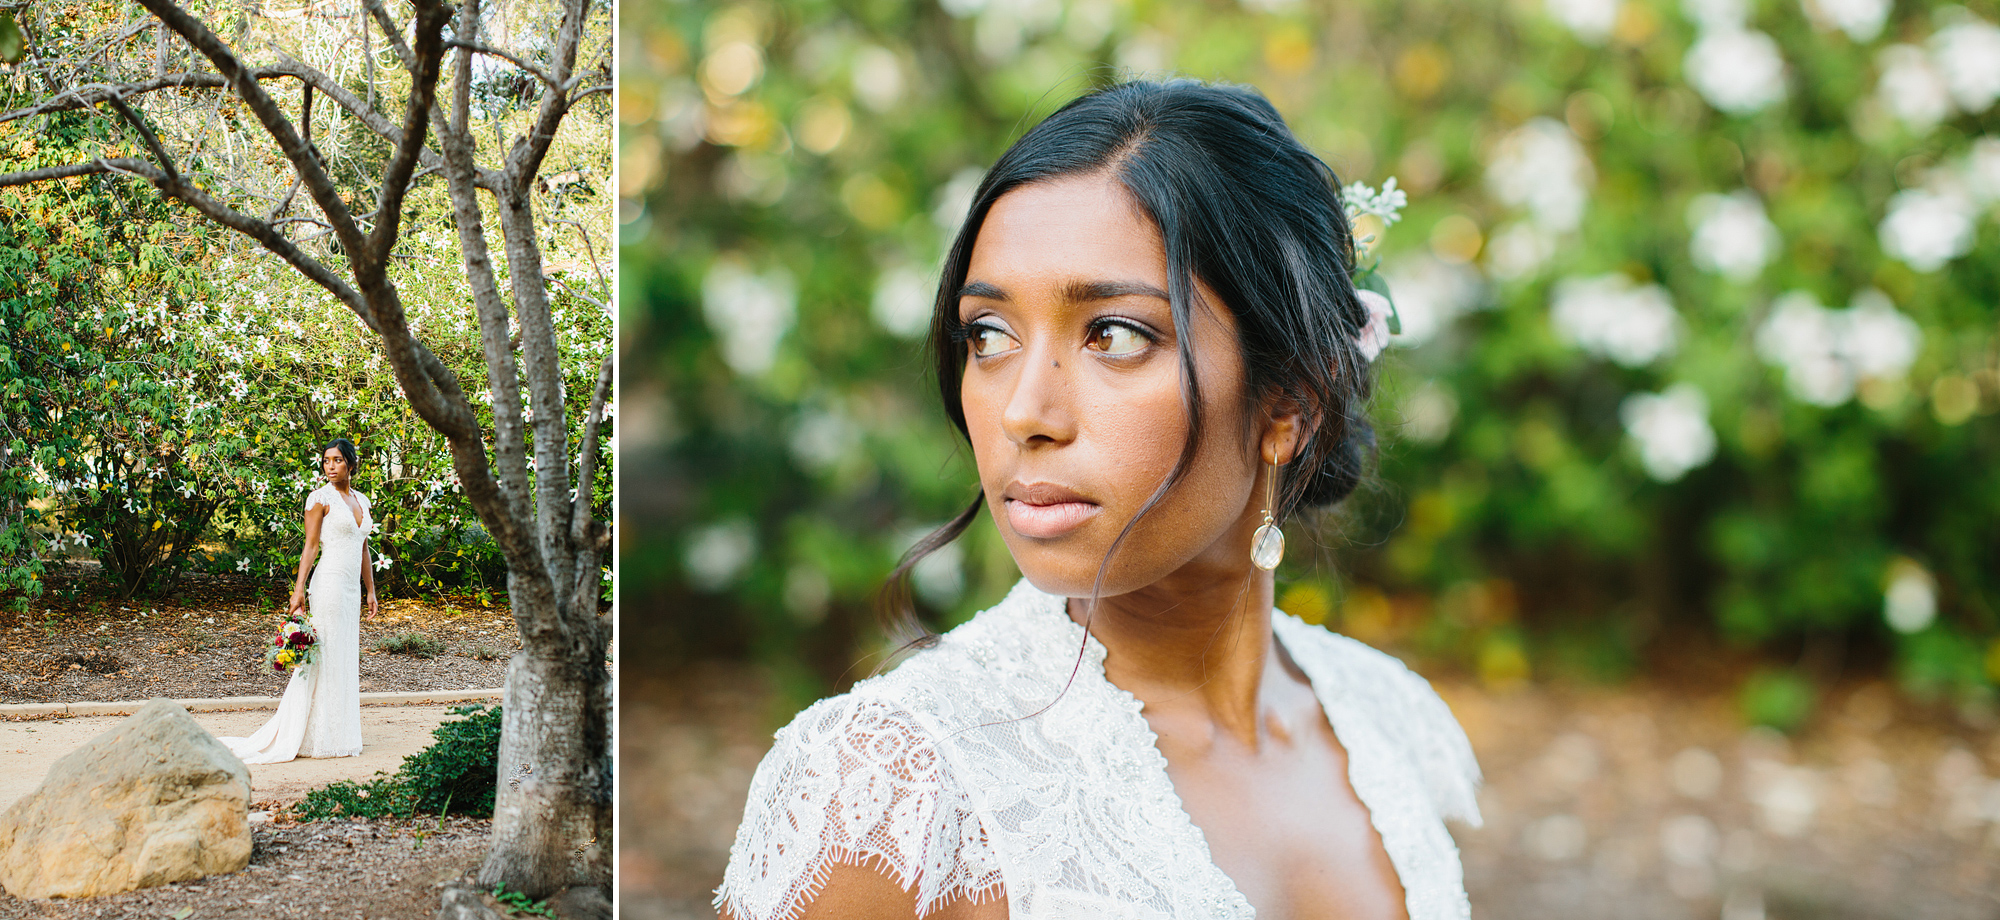 Portraits of the bride at the park. 